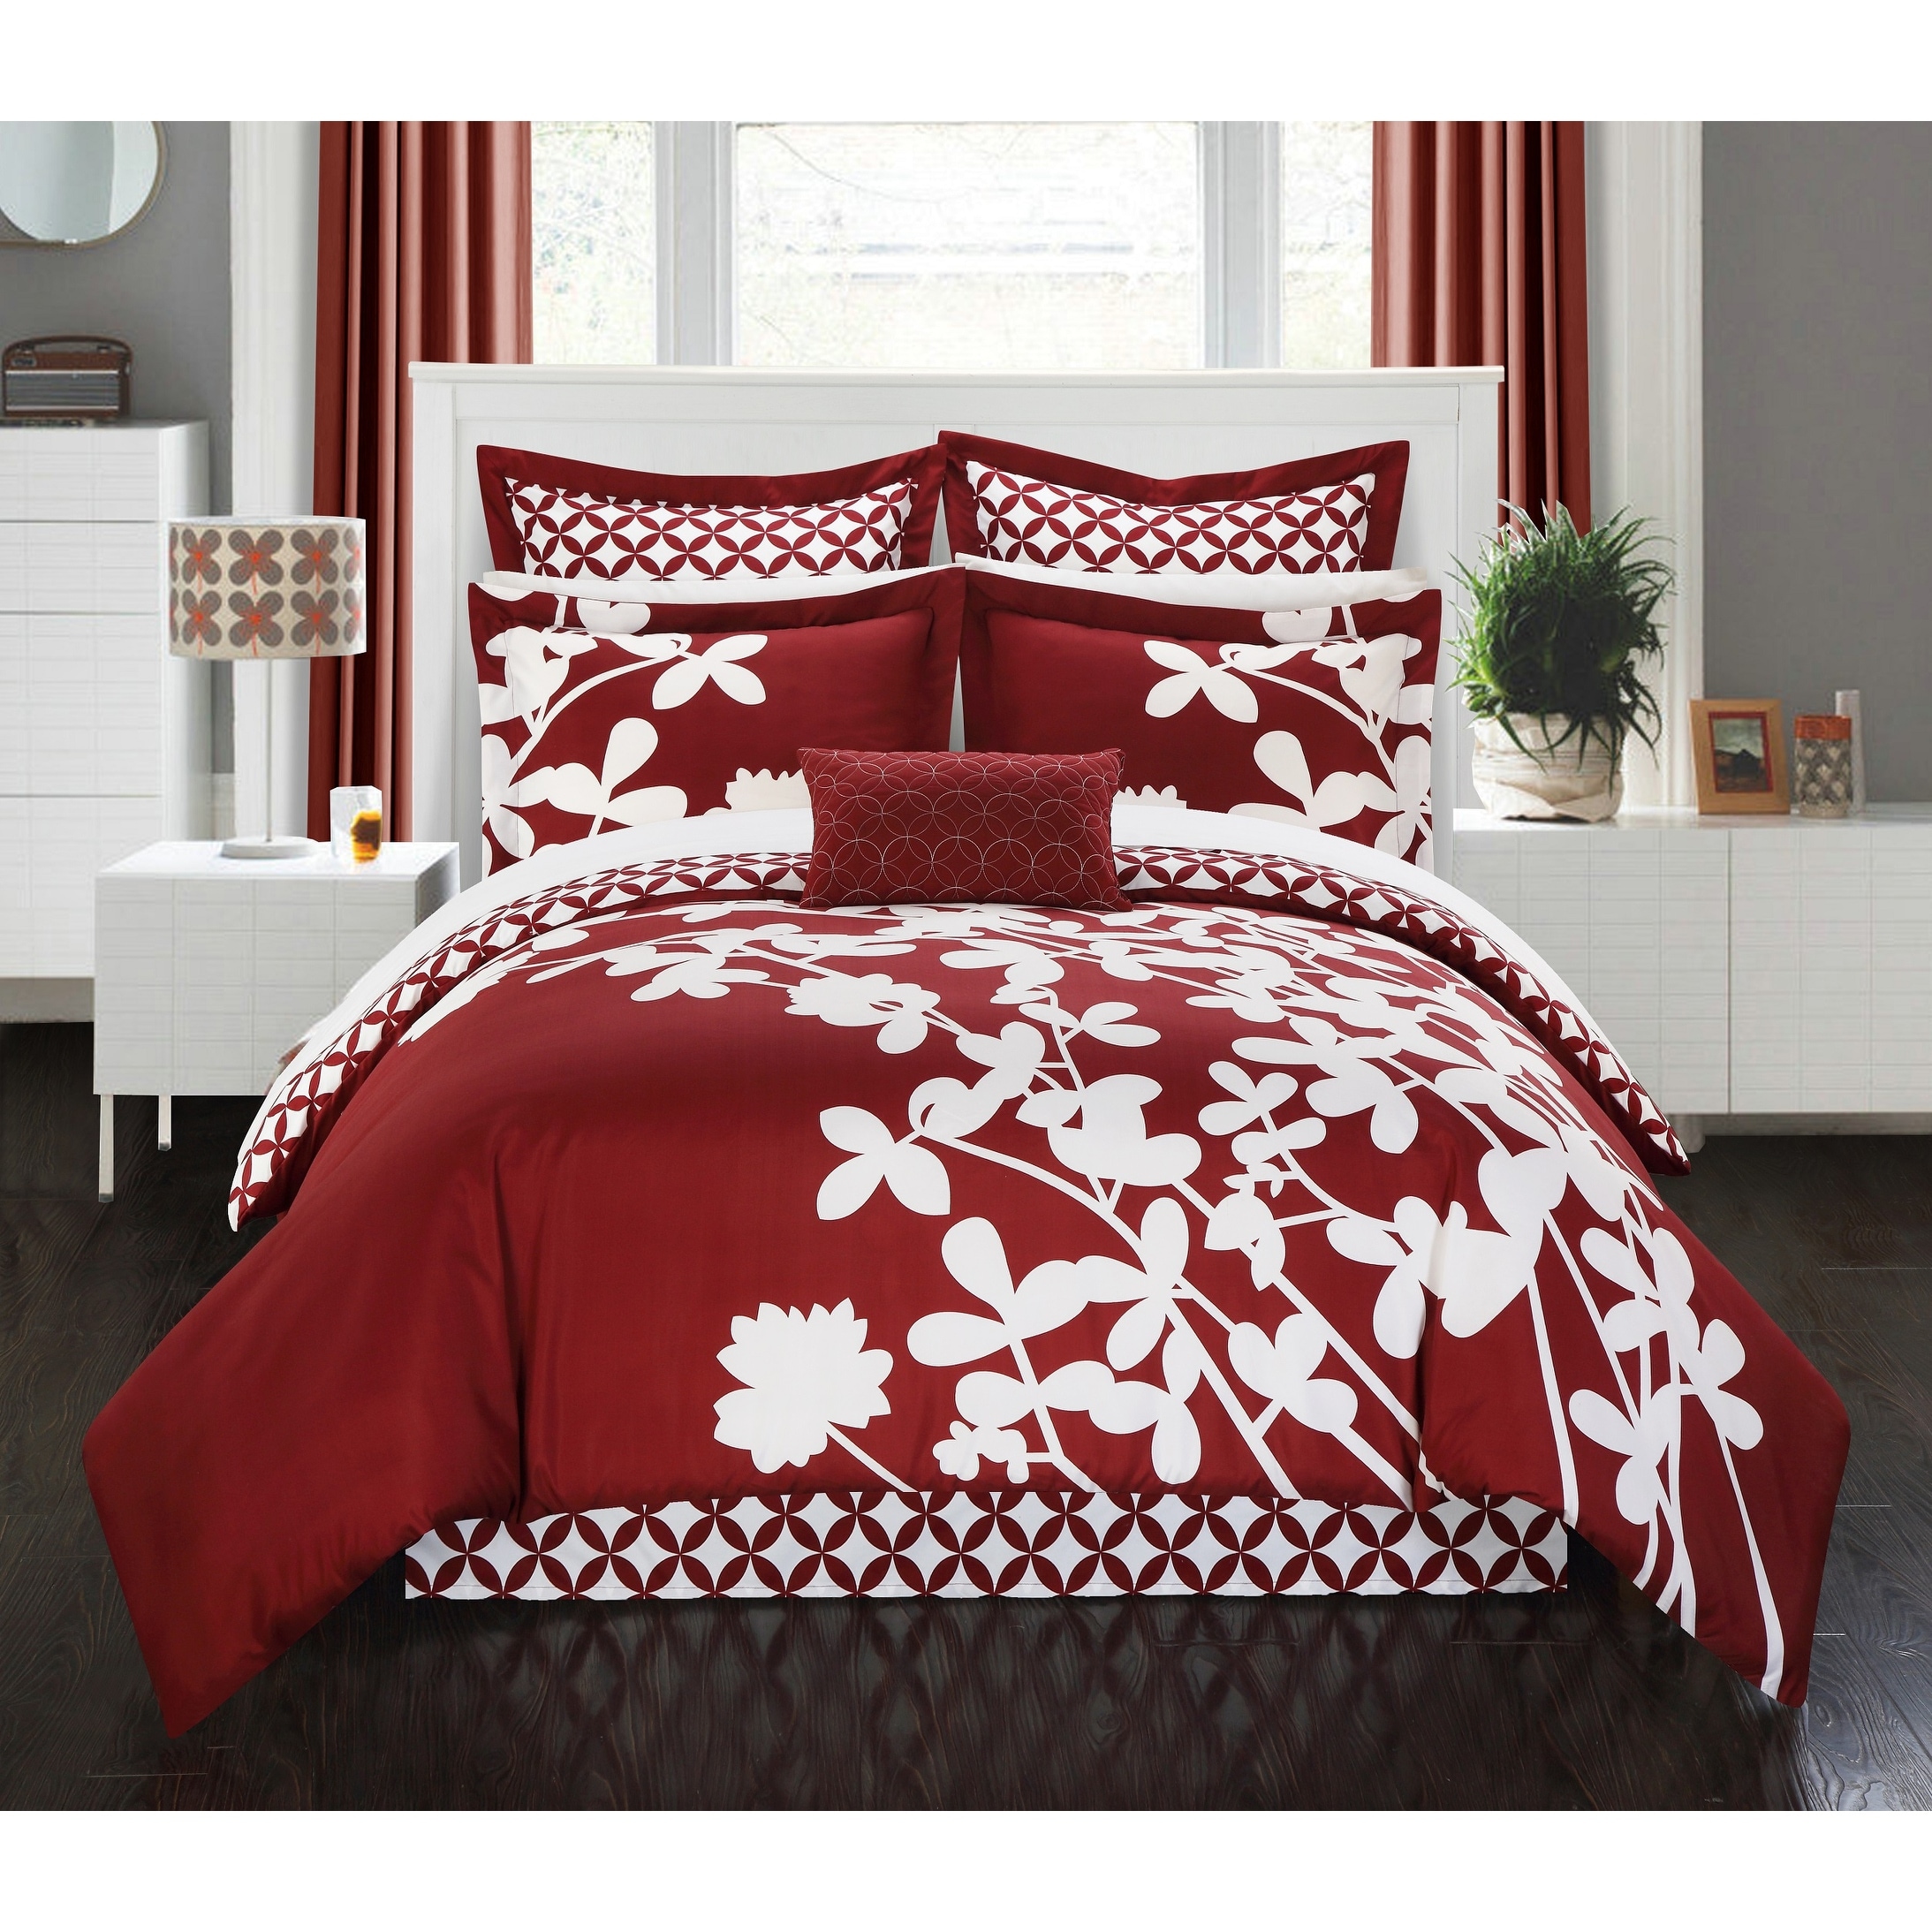 https://ak1.ostkcdn.com/images/products/is/images/direct/835d128fadb14cb91d661327c2b1b360b17e5c6a/Chic-Home-Ayesha-Reversible-Red-11-piece-Bed-in-a-Bag-with-Sheet-Set.jpg